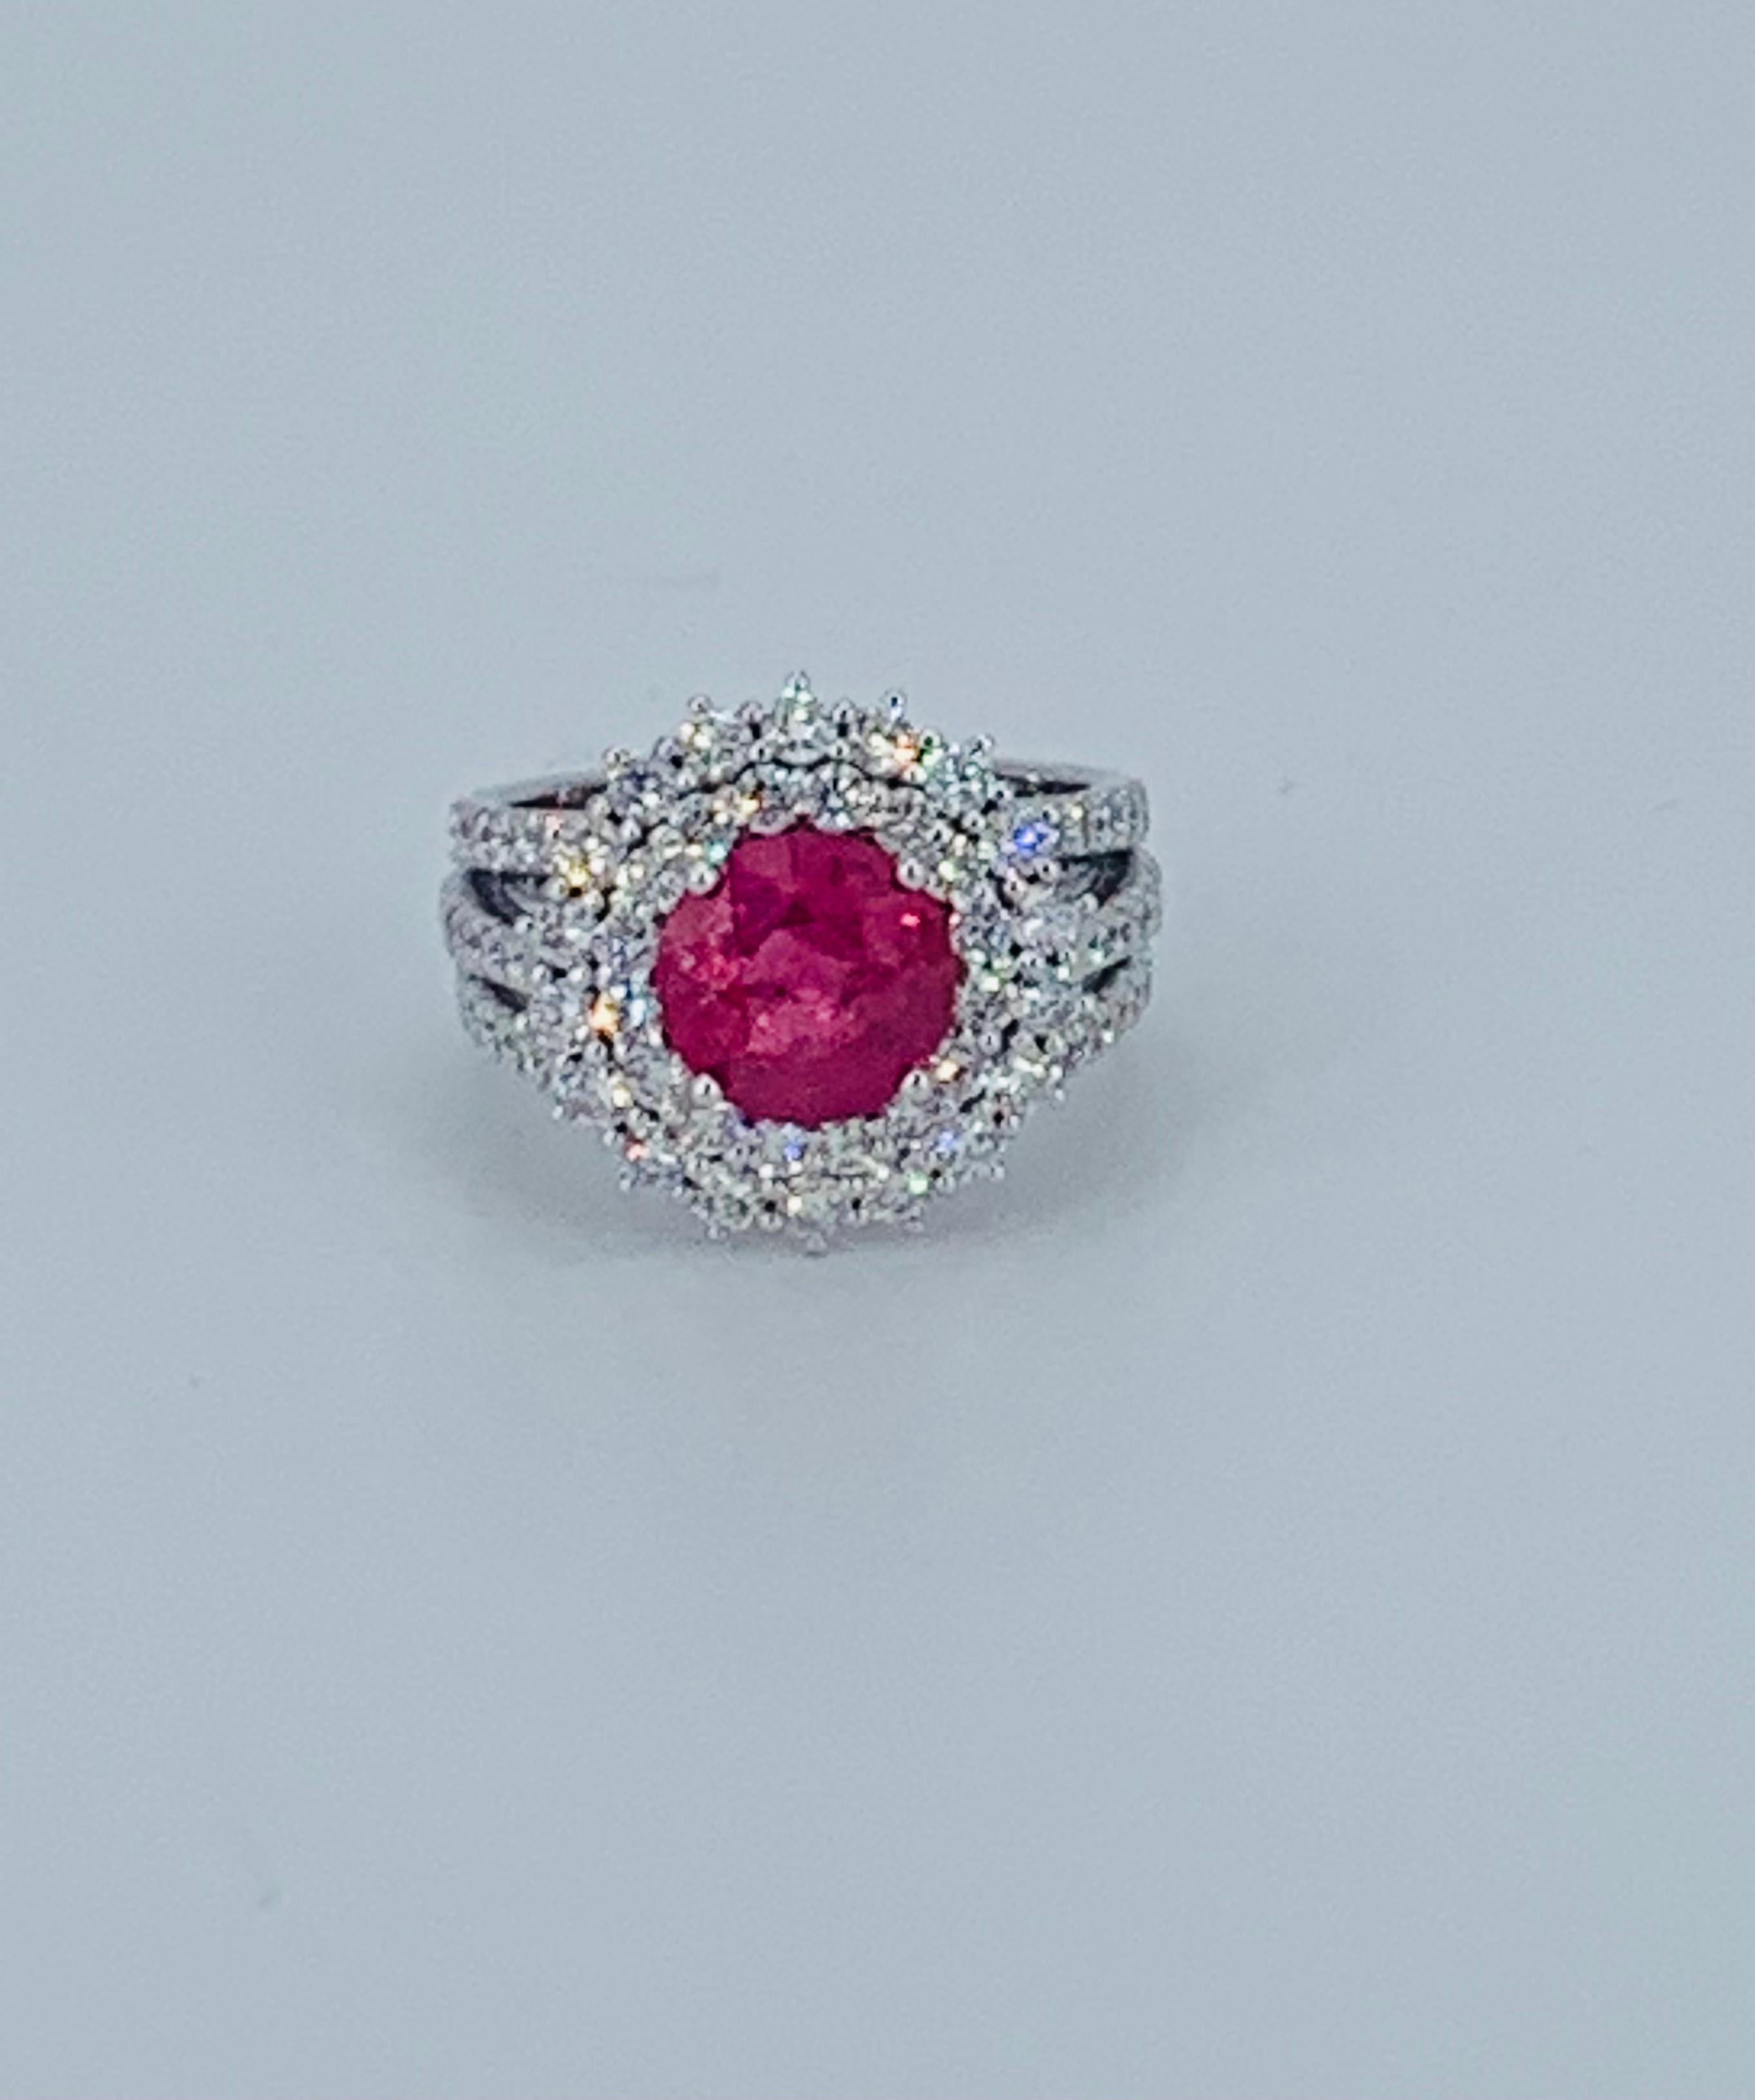 This beautifully bright Ruby and Diamond Halo cocktail ring is truly gorgeous. Nestled amongst multiple  Diamonds the natural Ruby is placed in the centre. 

The bright white natural Diamonds compliment the precious jewel and add extra beauty to the